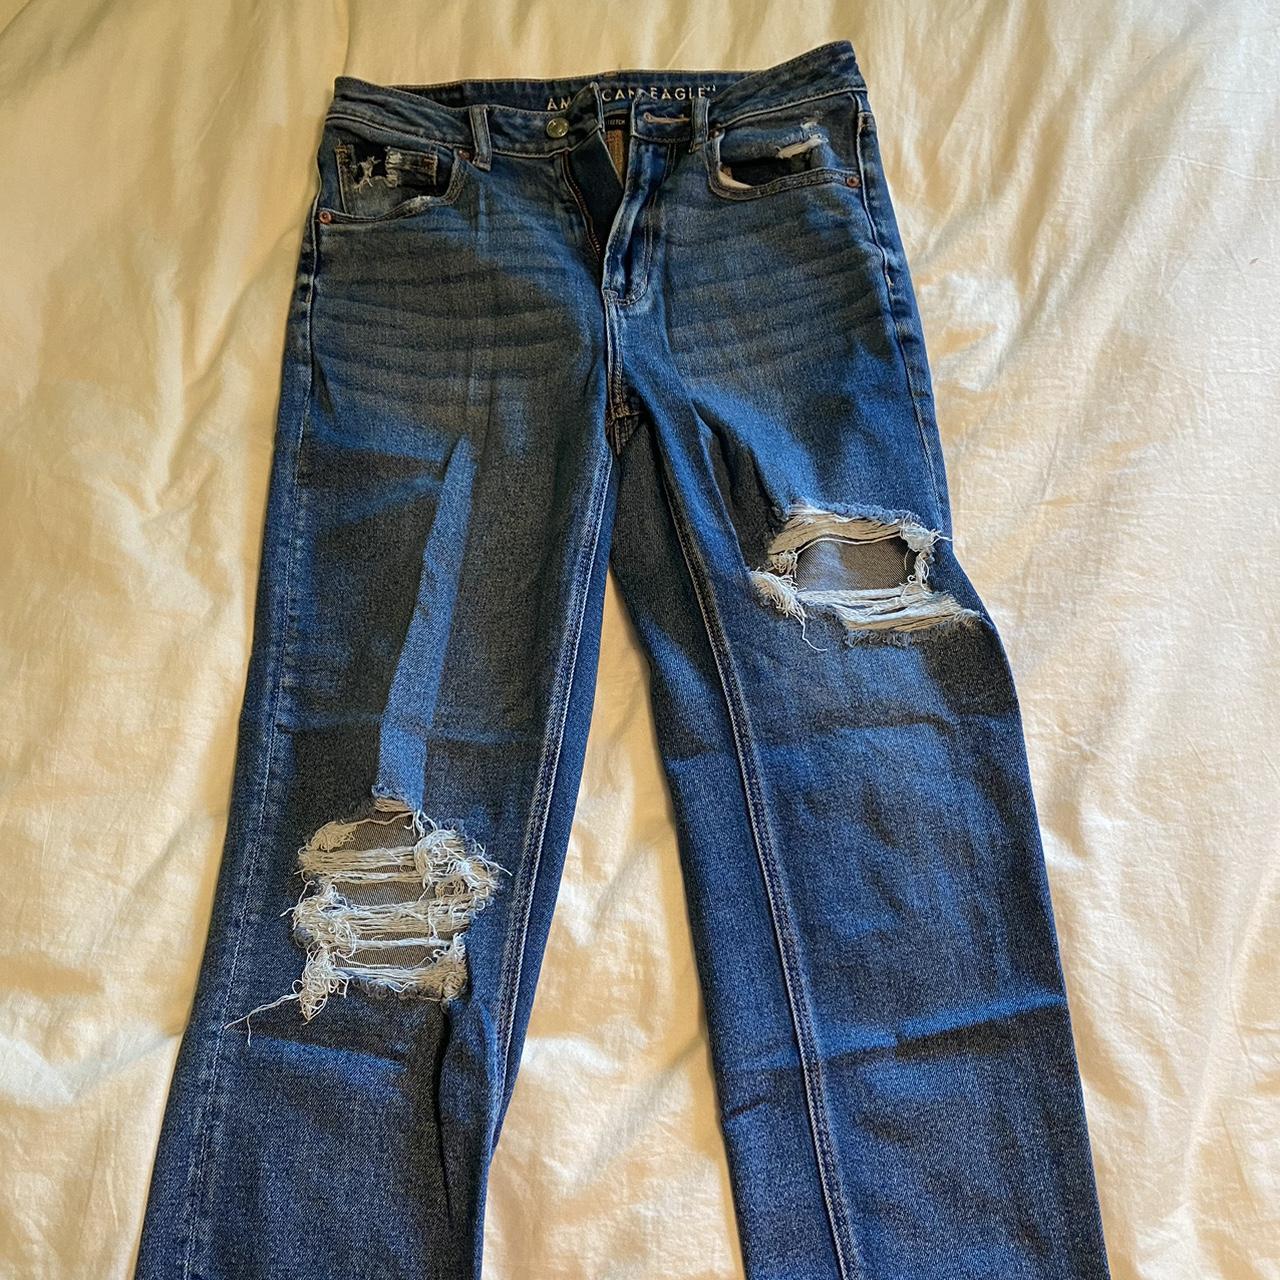 American Eagle ripped jeans > Like new, worn once - Depop